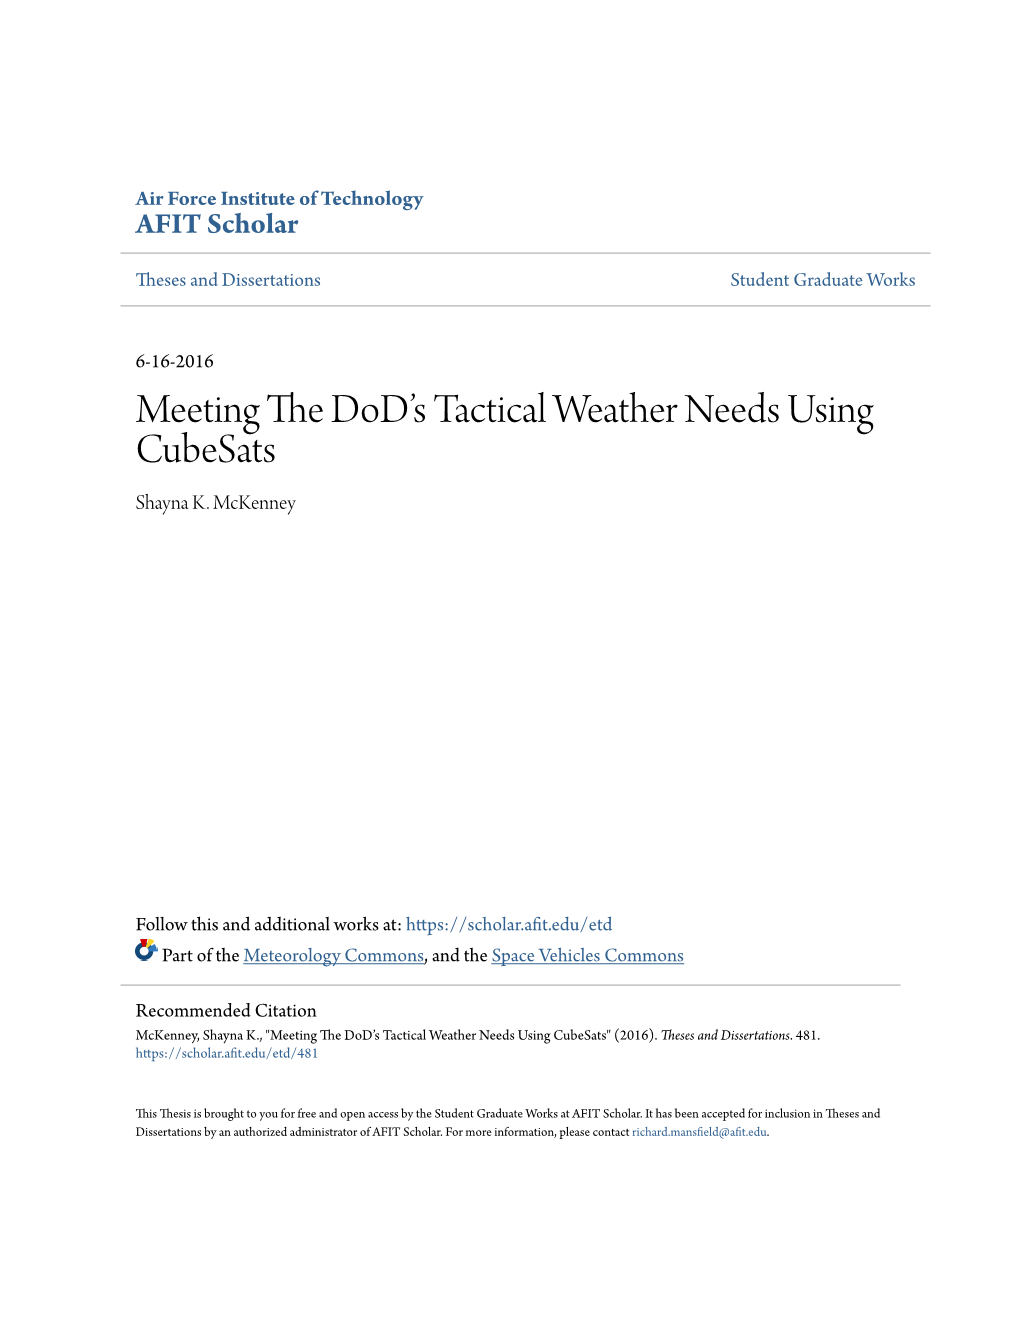 Meeting the Dod's Tactical Weather Needs Using Cubesats